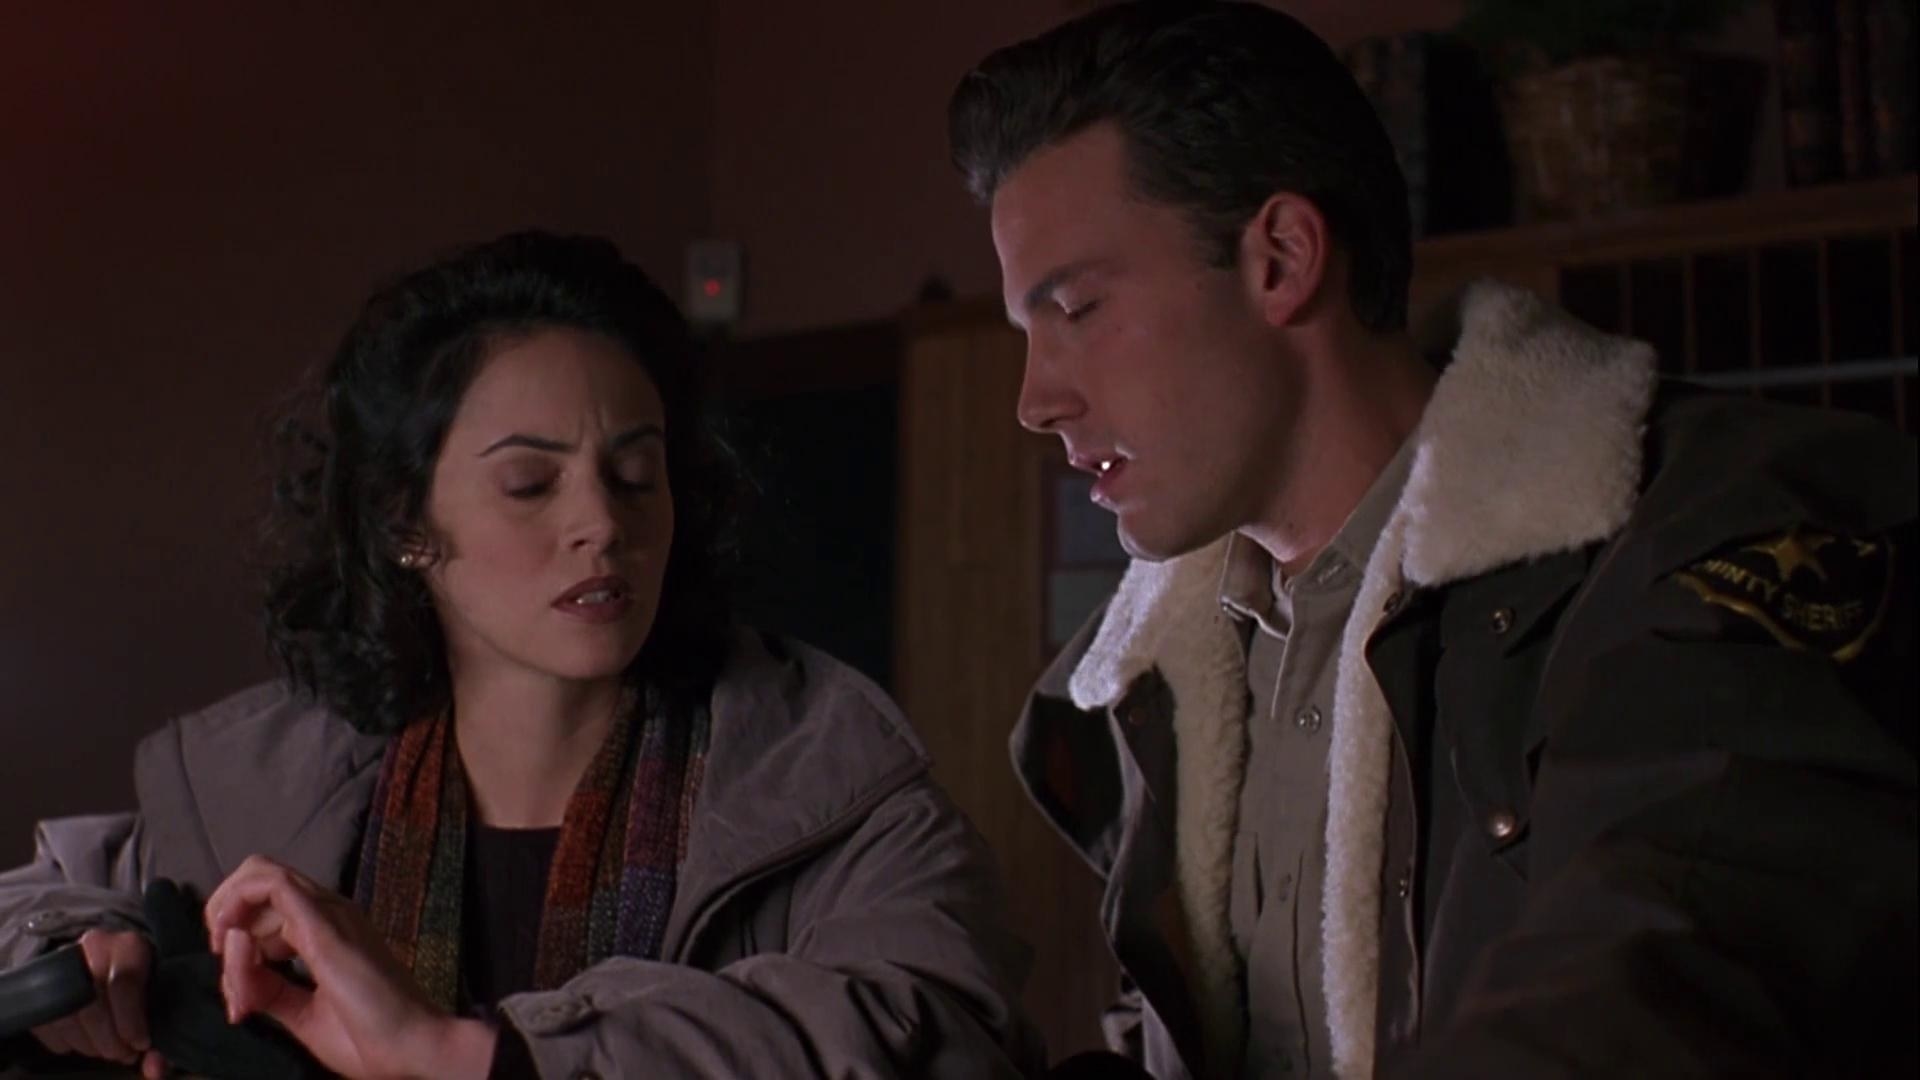 Ben Affleck as Sheriff Bryce Hammond and Rose McGowan as Lisa Pailey in &quot;Phantoms&quot;